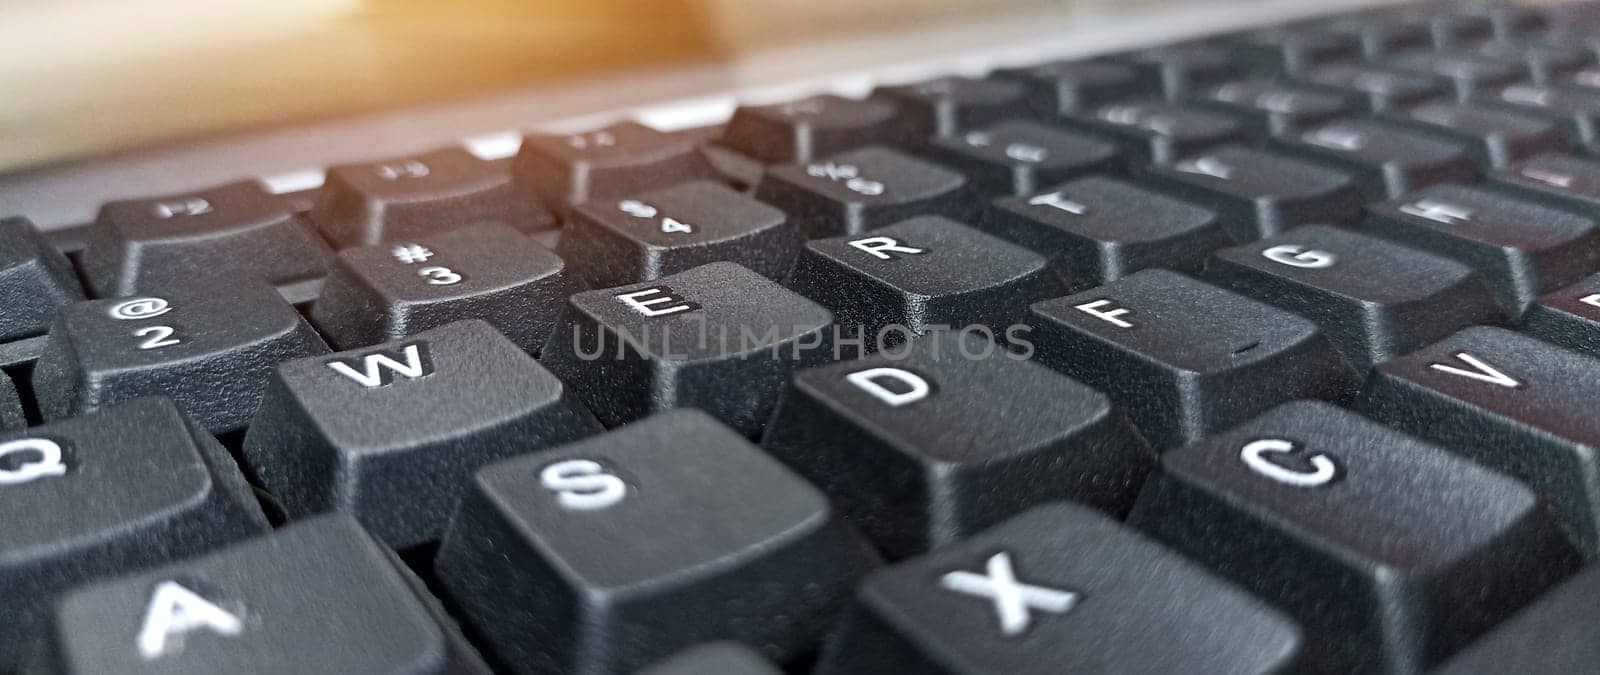 Close-up side view of black keyboard